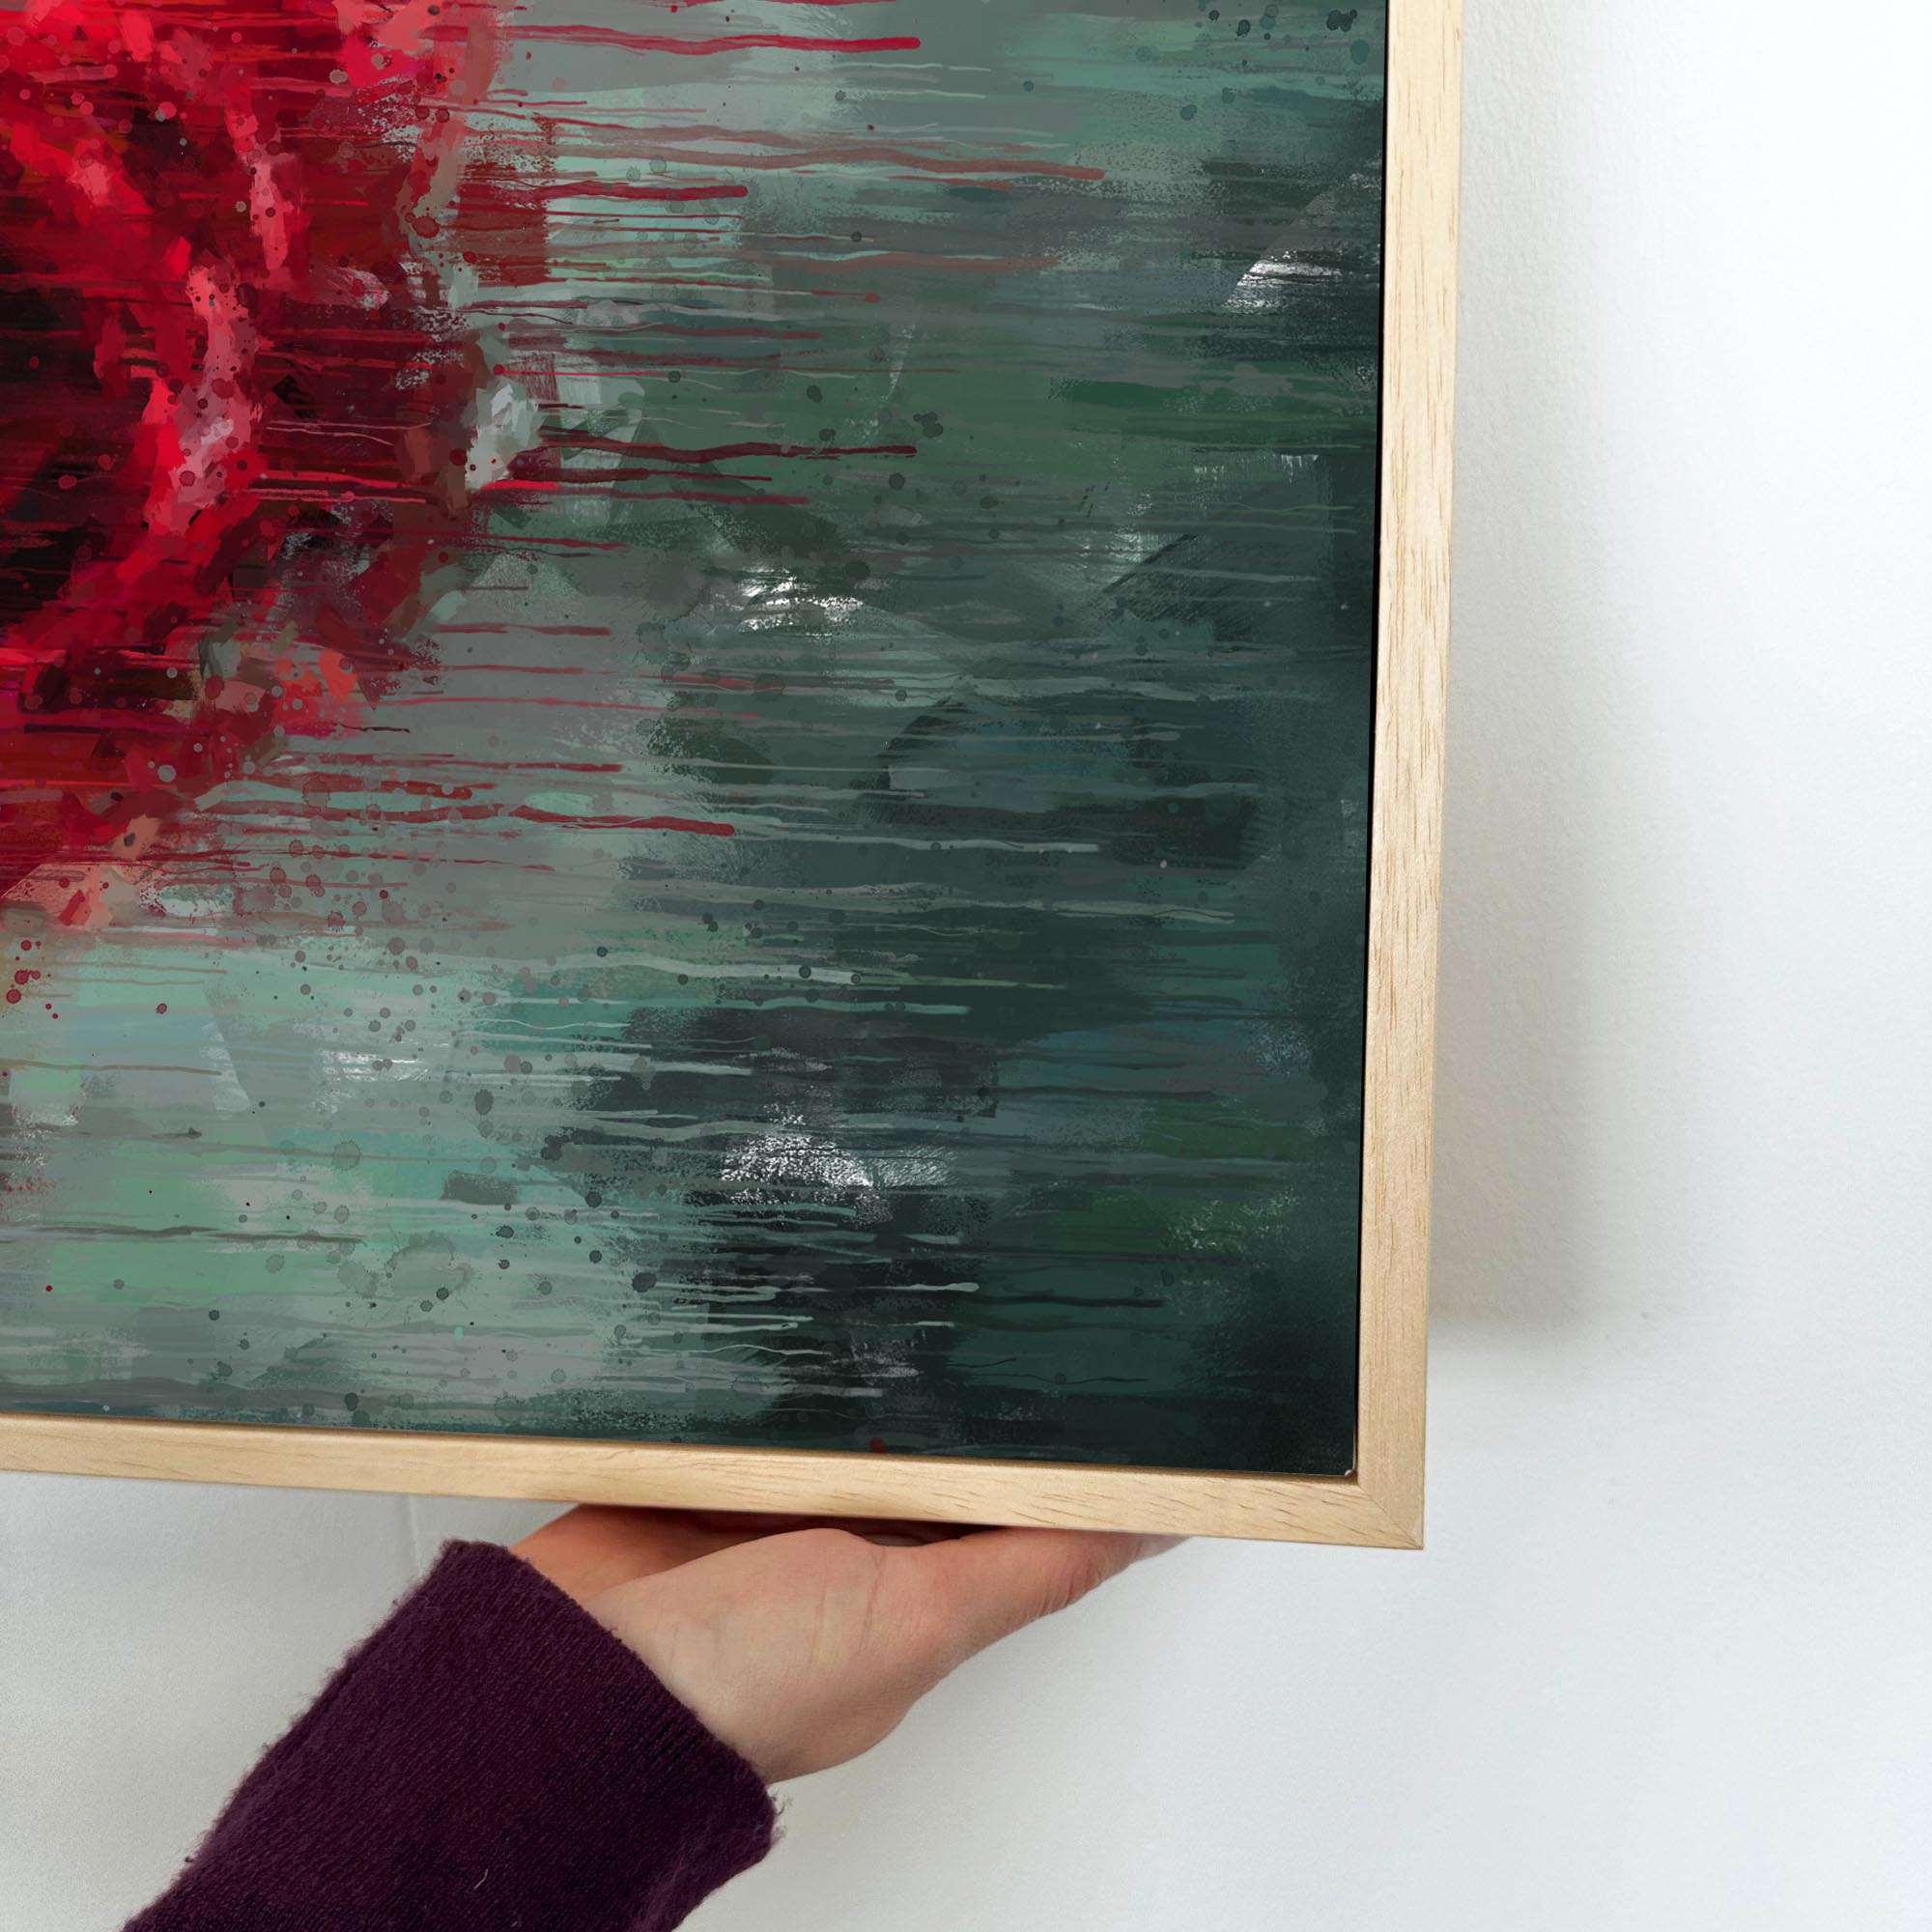 Red Rose Painting Canvas Print